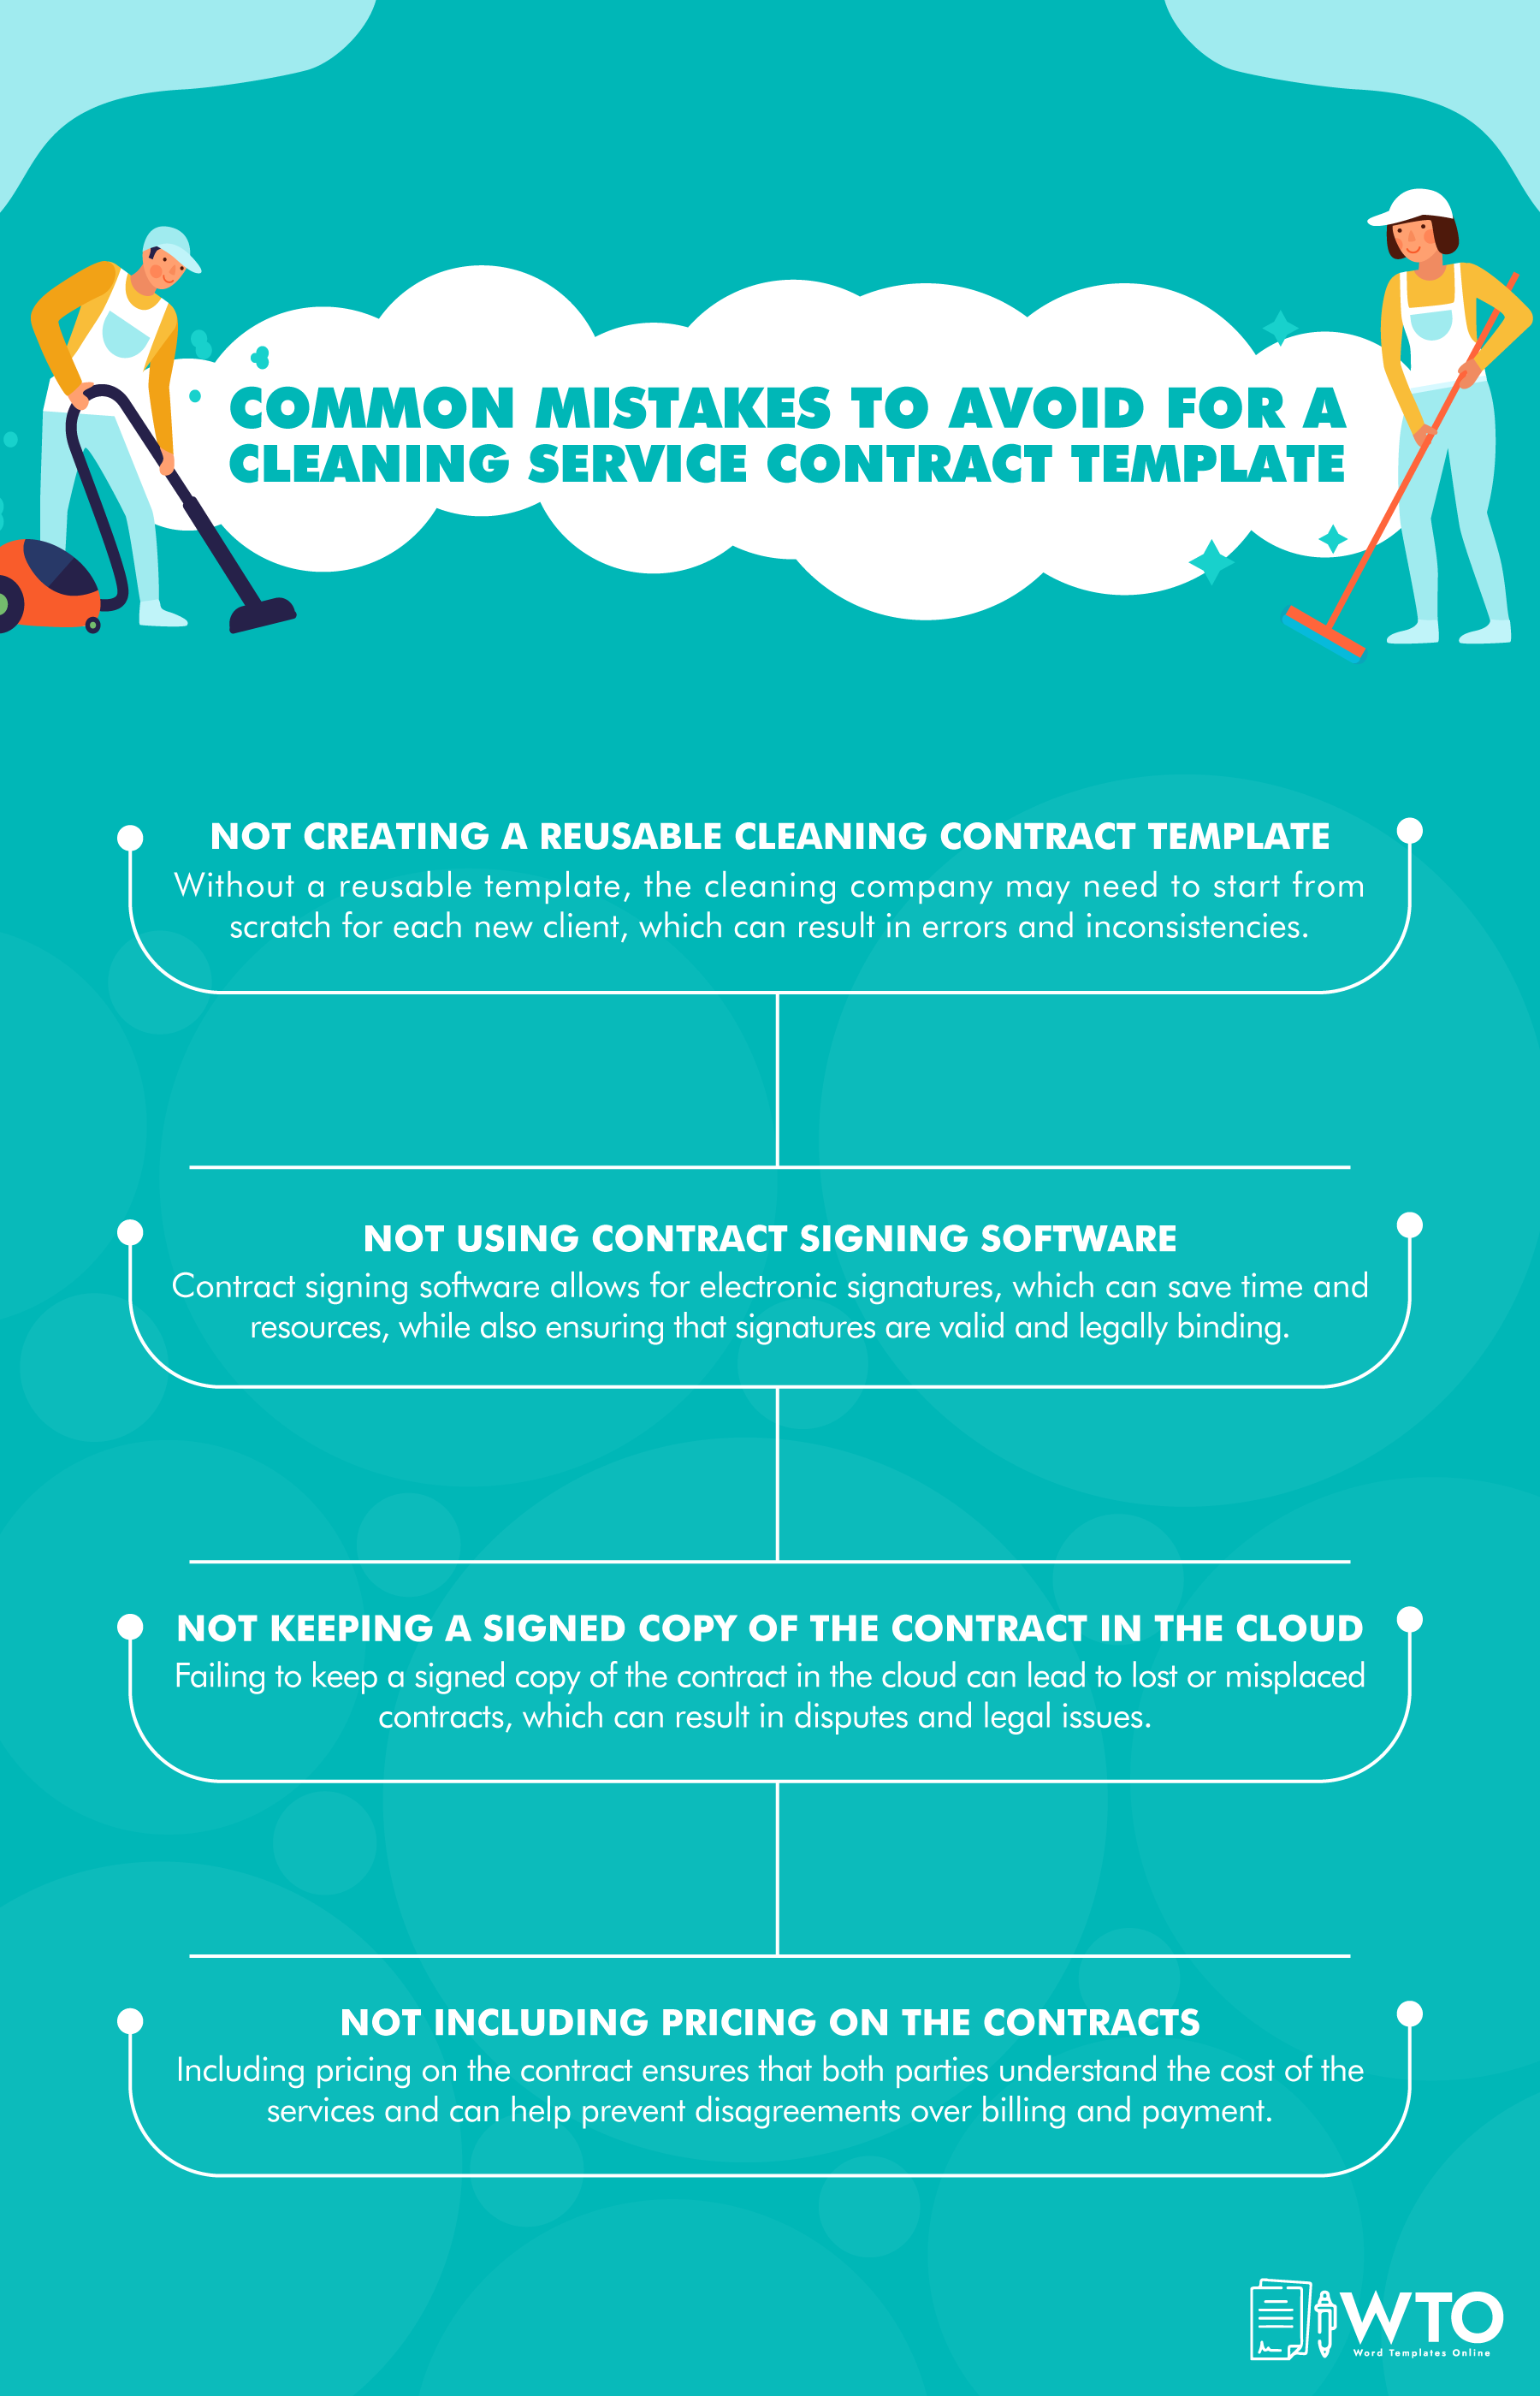 This infographic is about mistakes to avoid for CSC template.